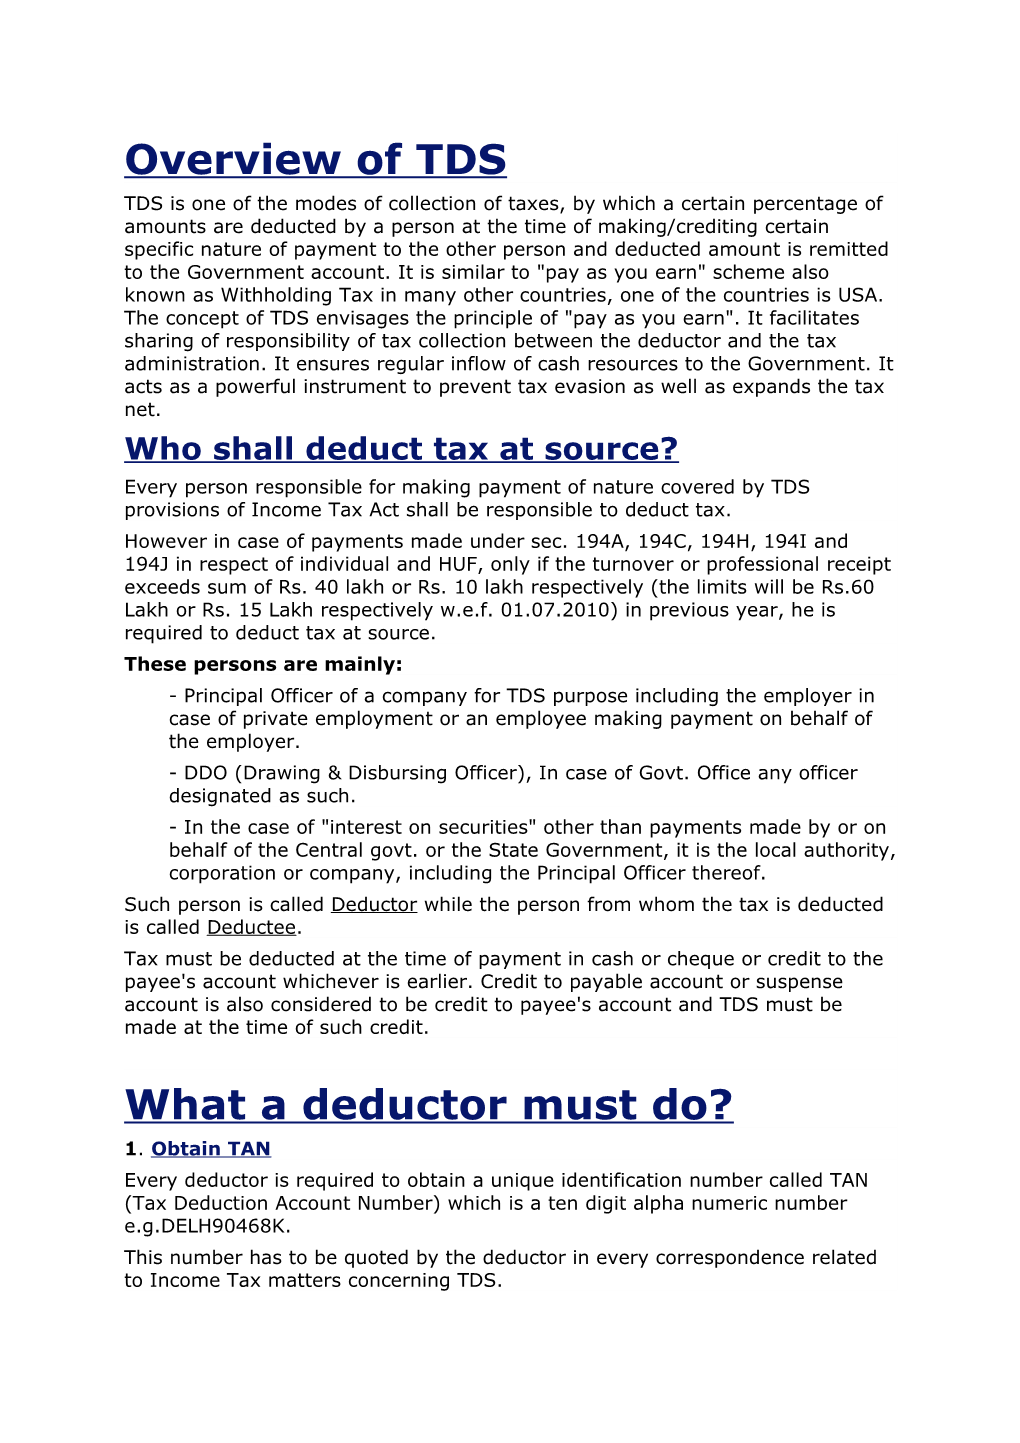 Who Shall Deduct Tax at Source?